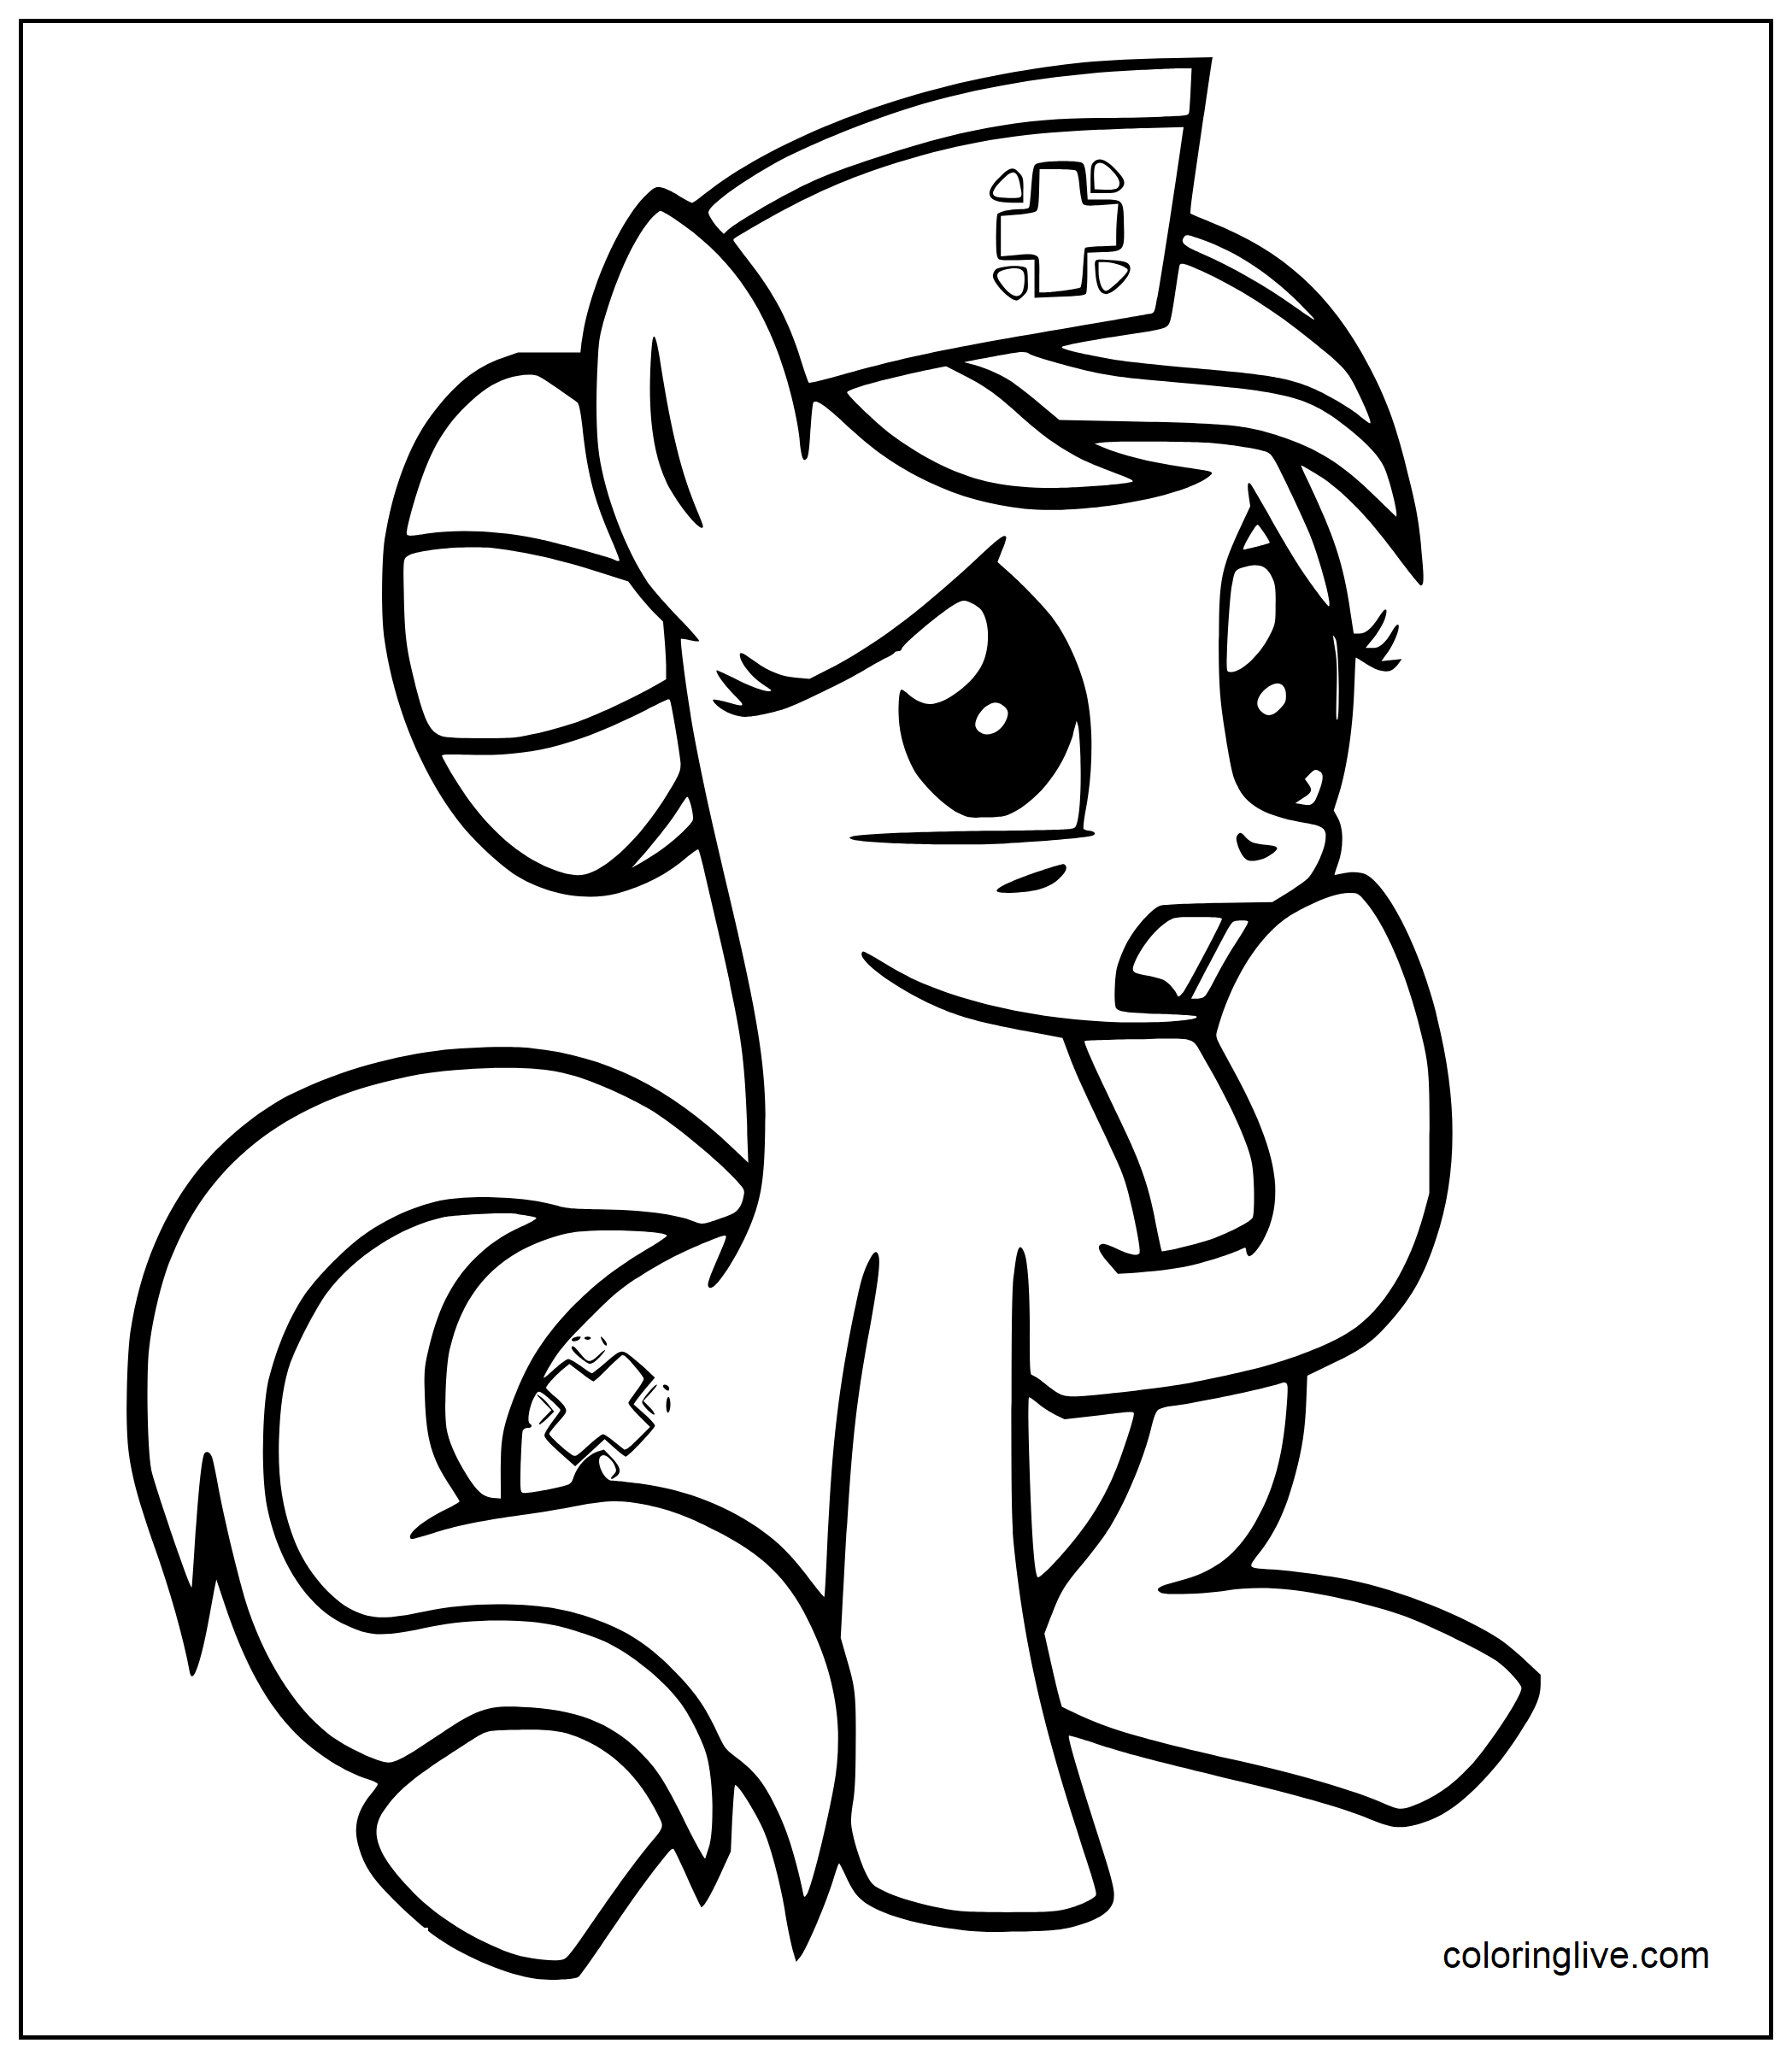 Printable MLP Nurse Redheart Coloring Page for kids.